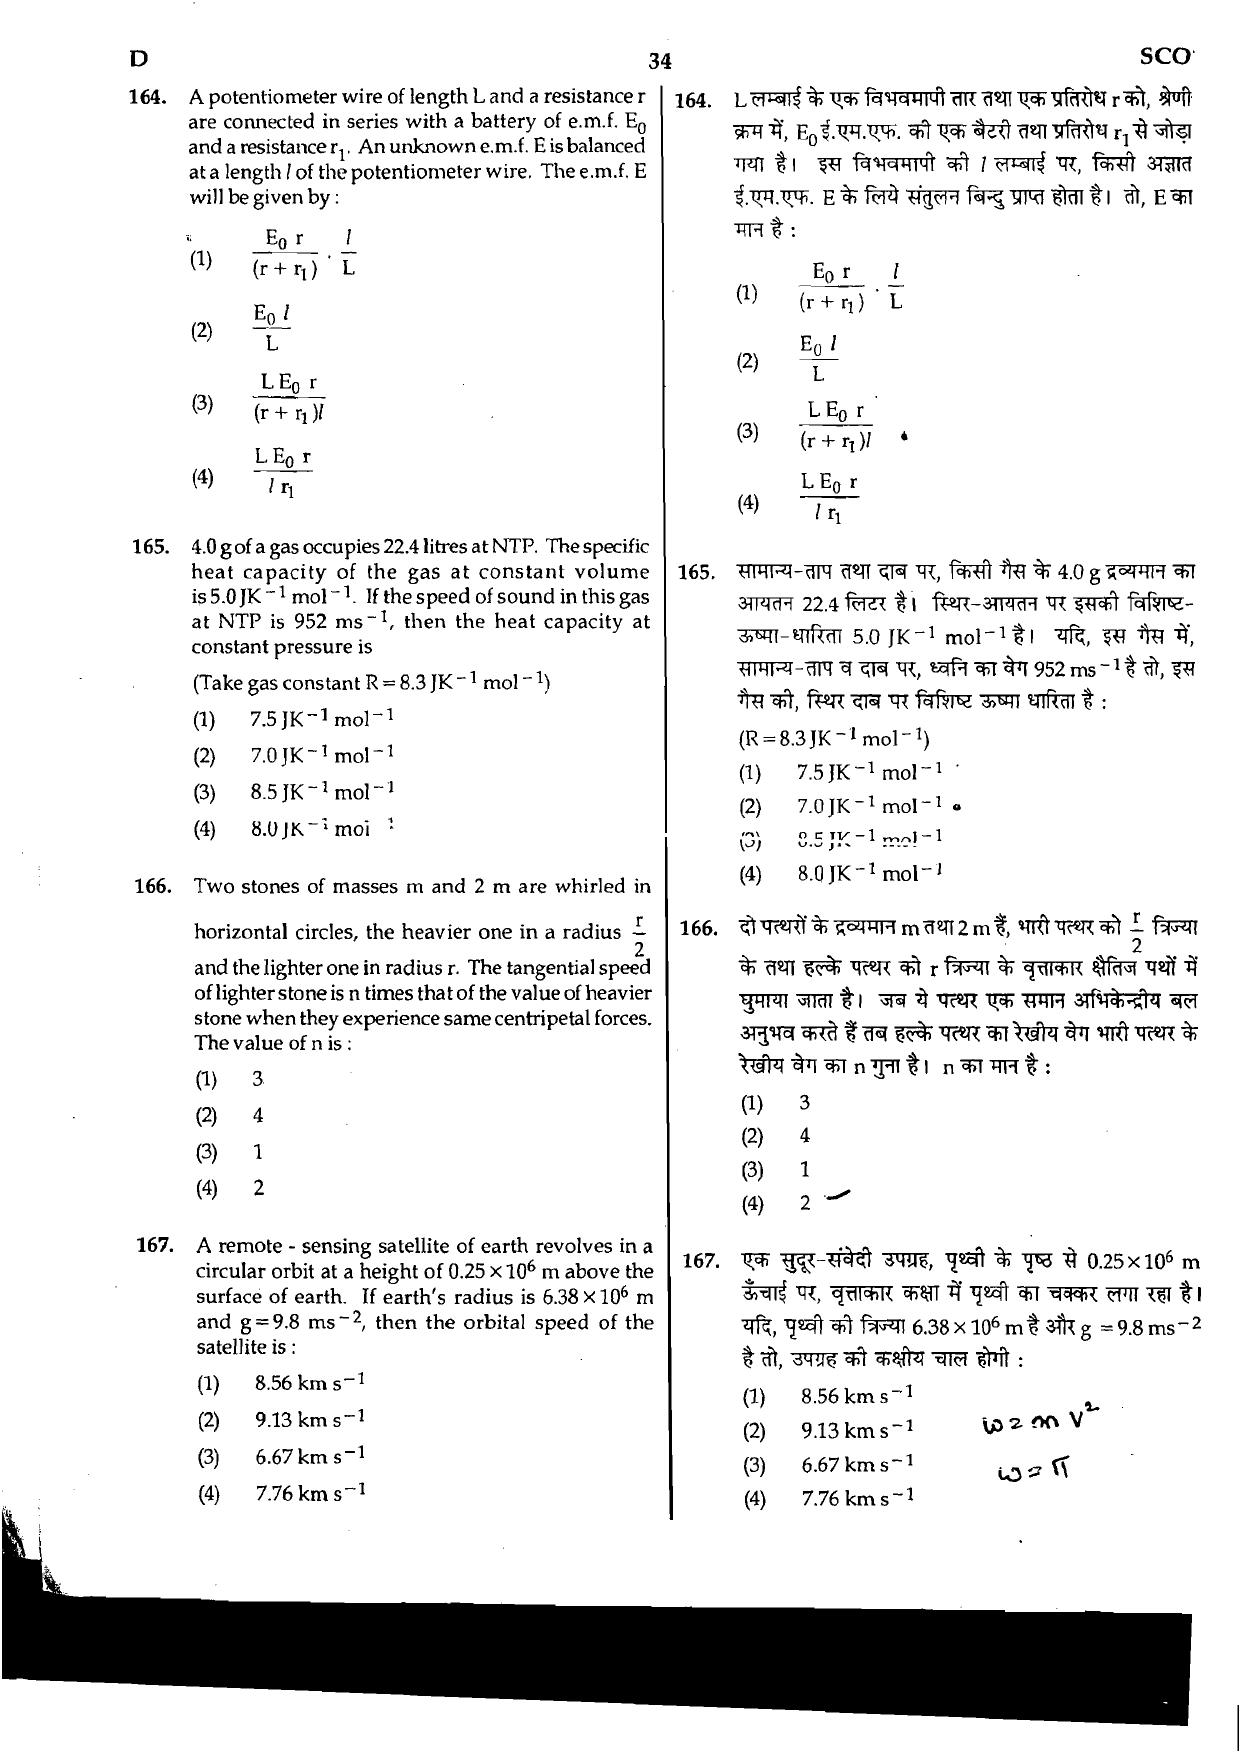 NEET Code D 2015 Question Paper - Page 34